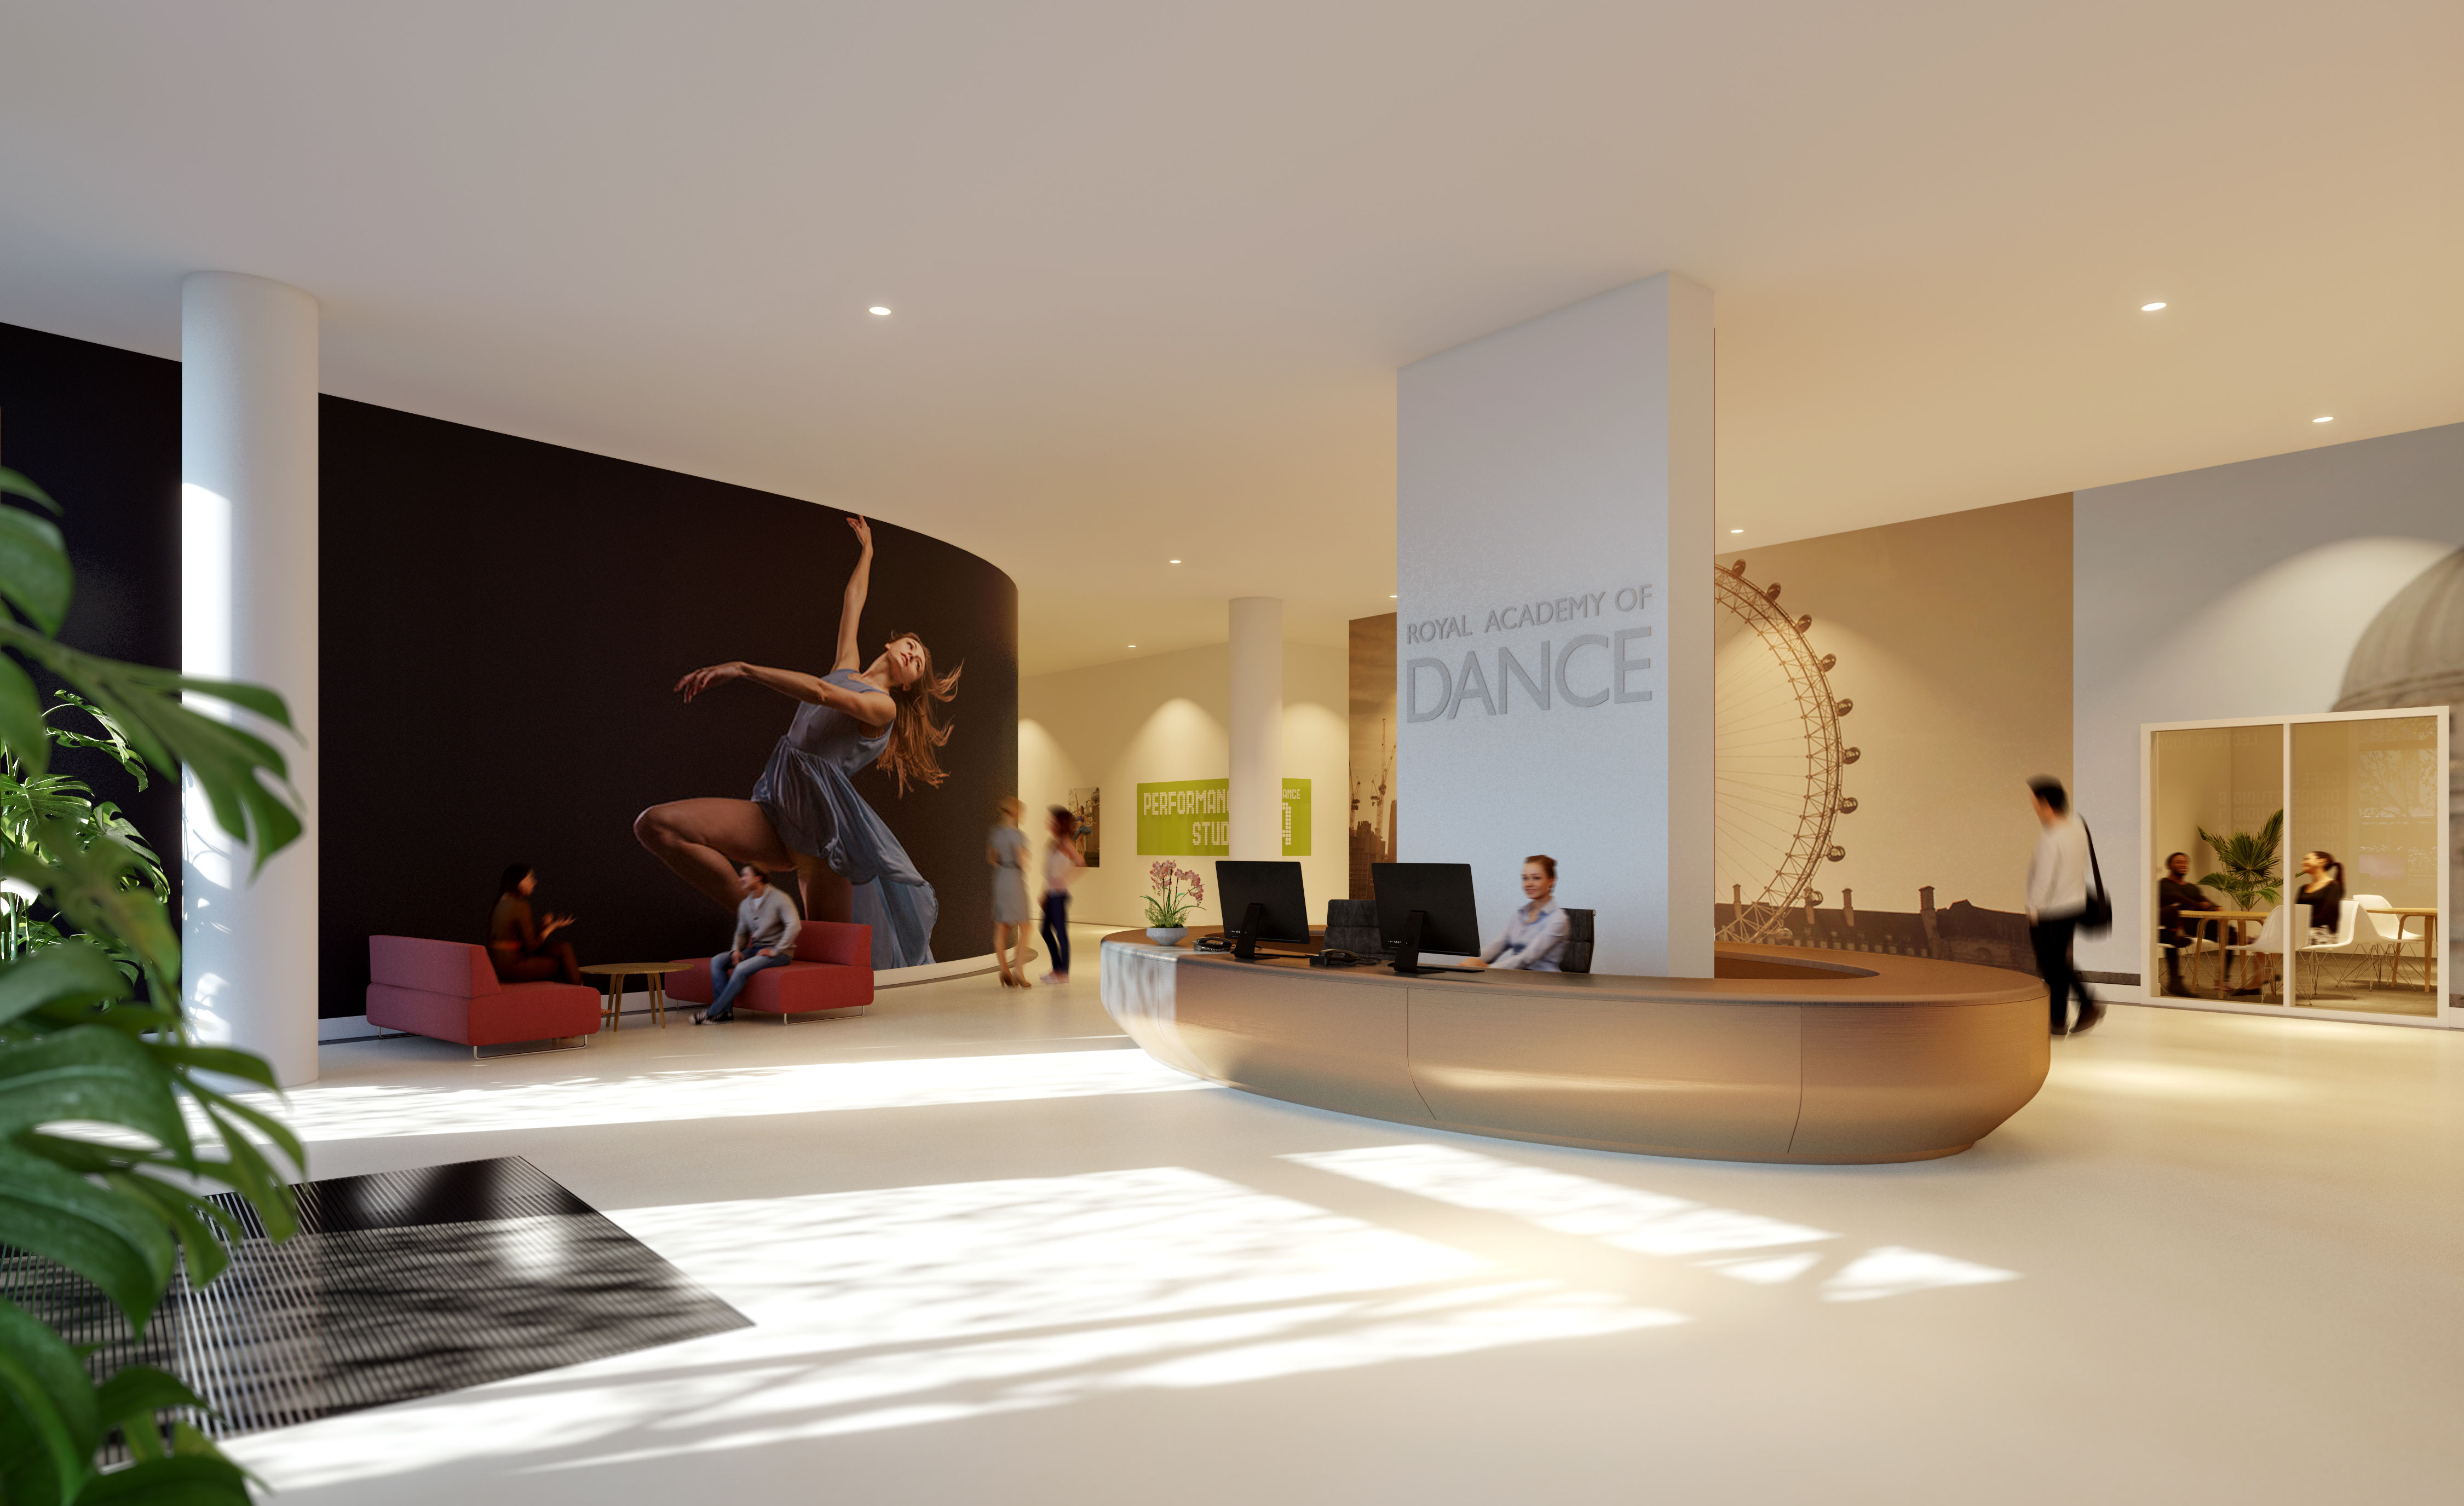 Discover the Royal Academy of Dance’s New Home in Battersea